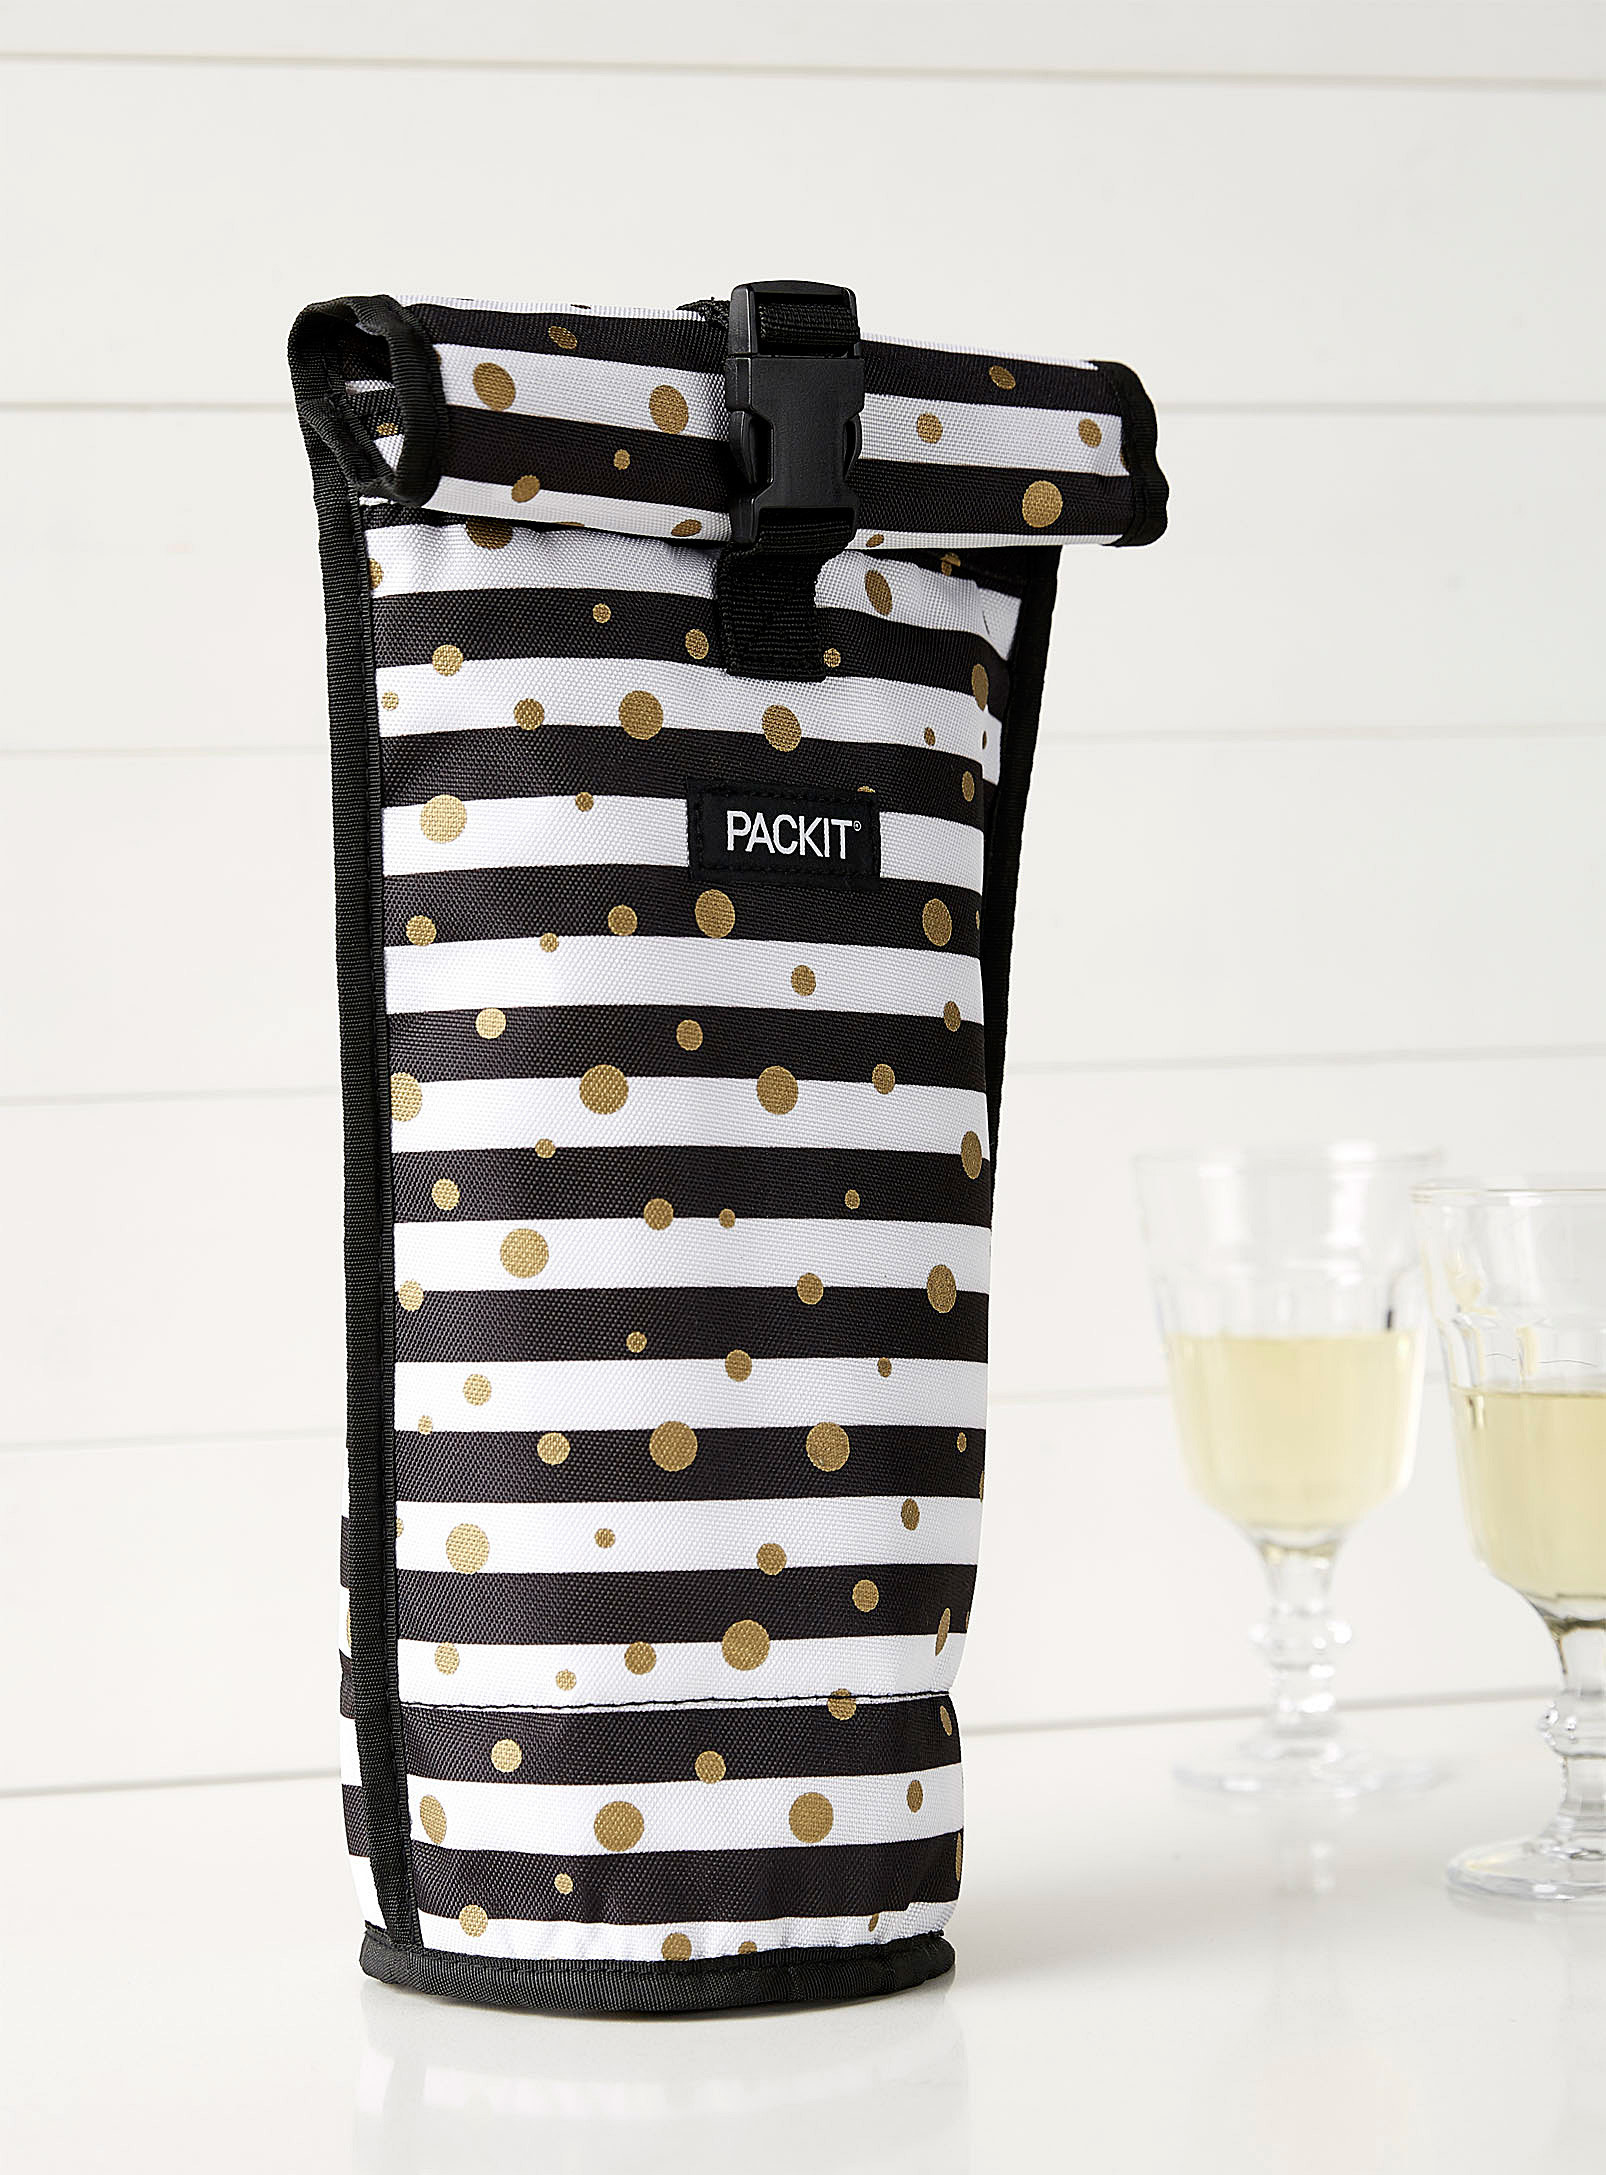 A wine bag that can be put in the freezer with a buckle